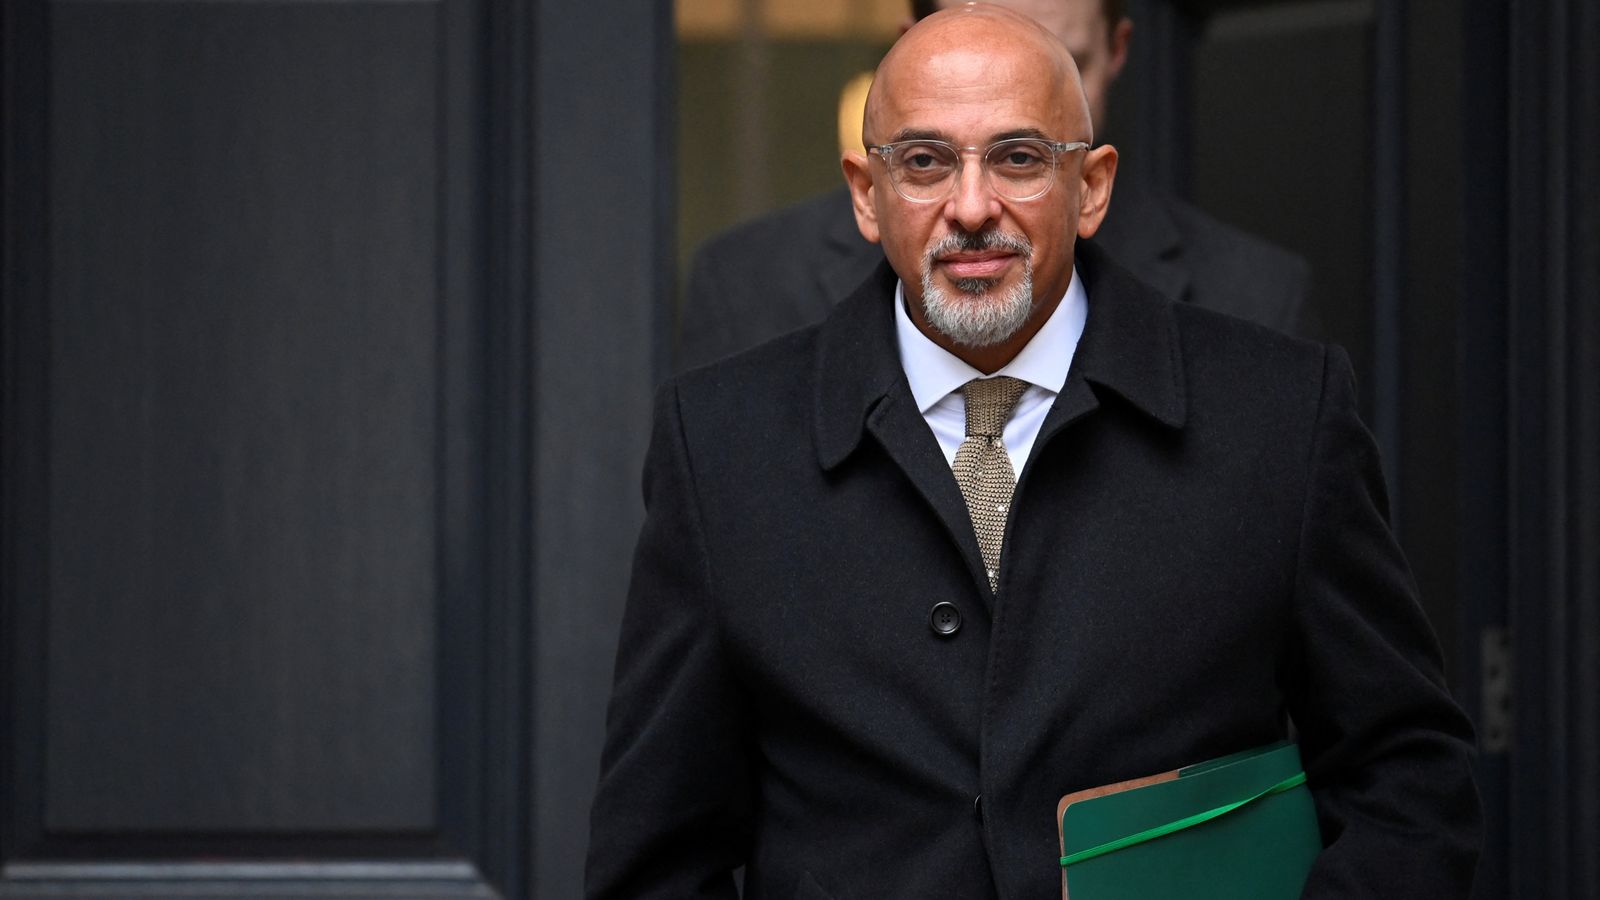 Tory peer Lord Hayward joins calls for Nadhim Zahawi to 'consider his position' over tax row 